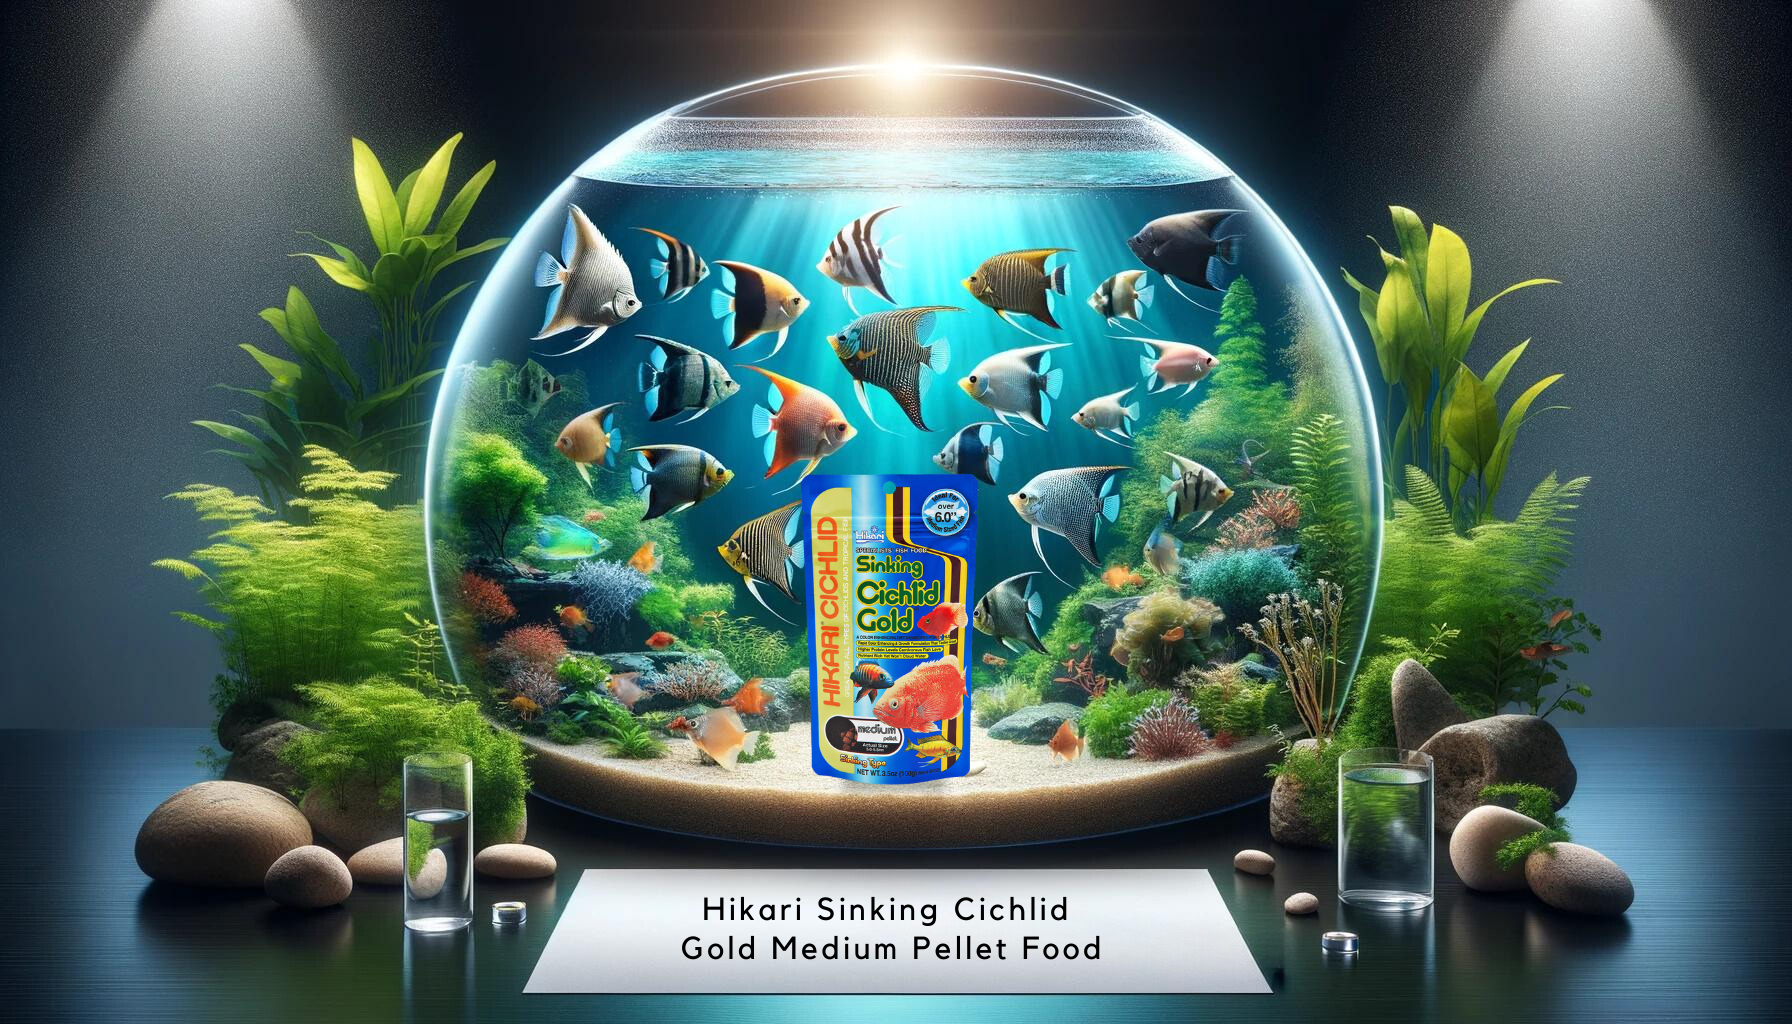 An image of a fish food product labeled "Hikari Sinking Cichlid Gold Medium Pellet Food" prominently displayed in front of an artistic representation of a spherical fish tank filled with a variety of colorful angelfish and lush aquatic plants, suggesting it's a suitable food for freshwater angelfish.